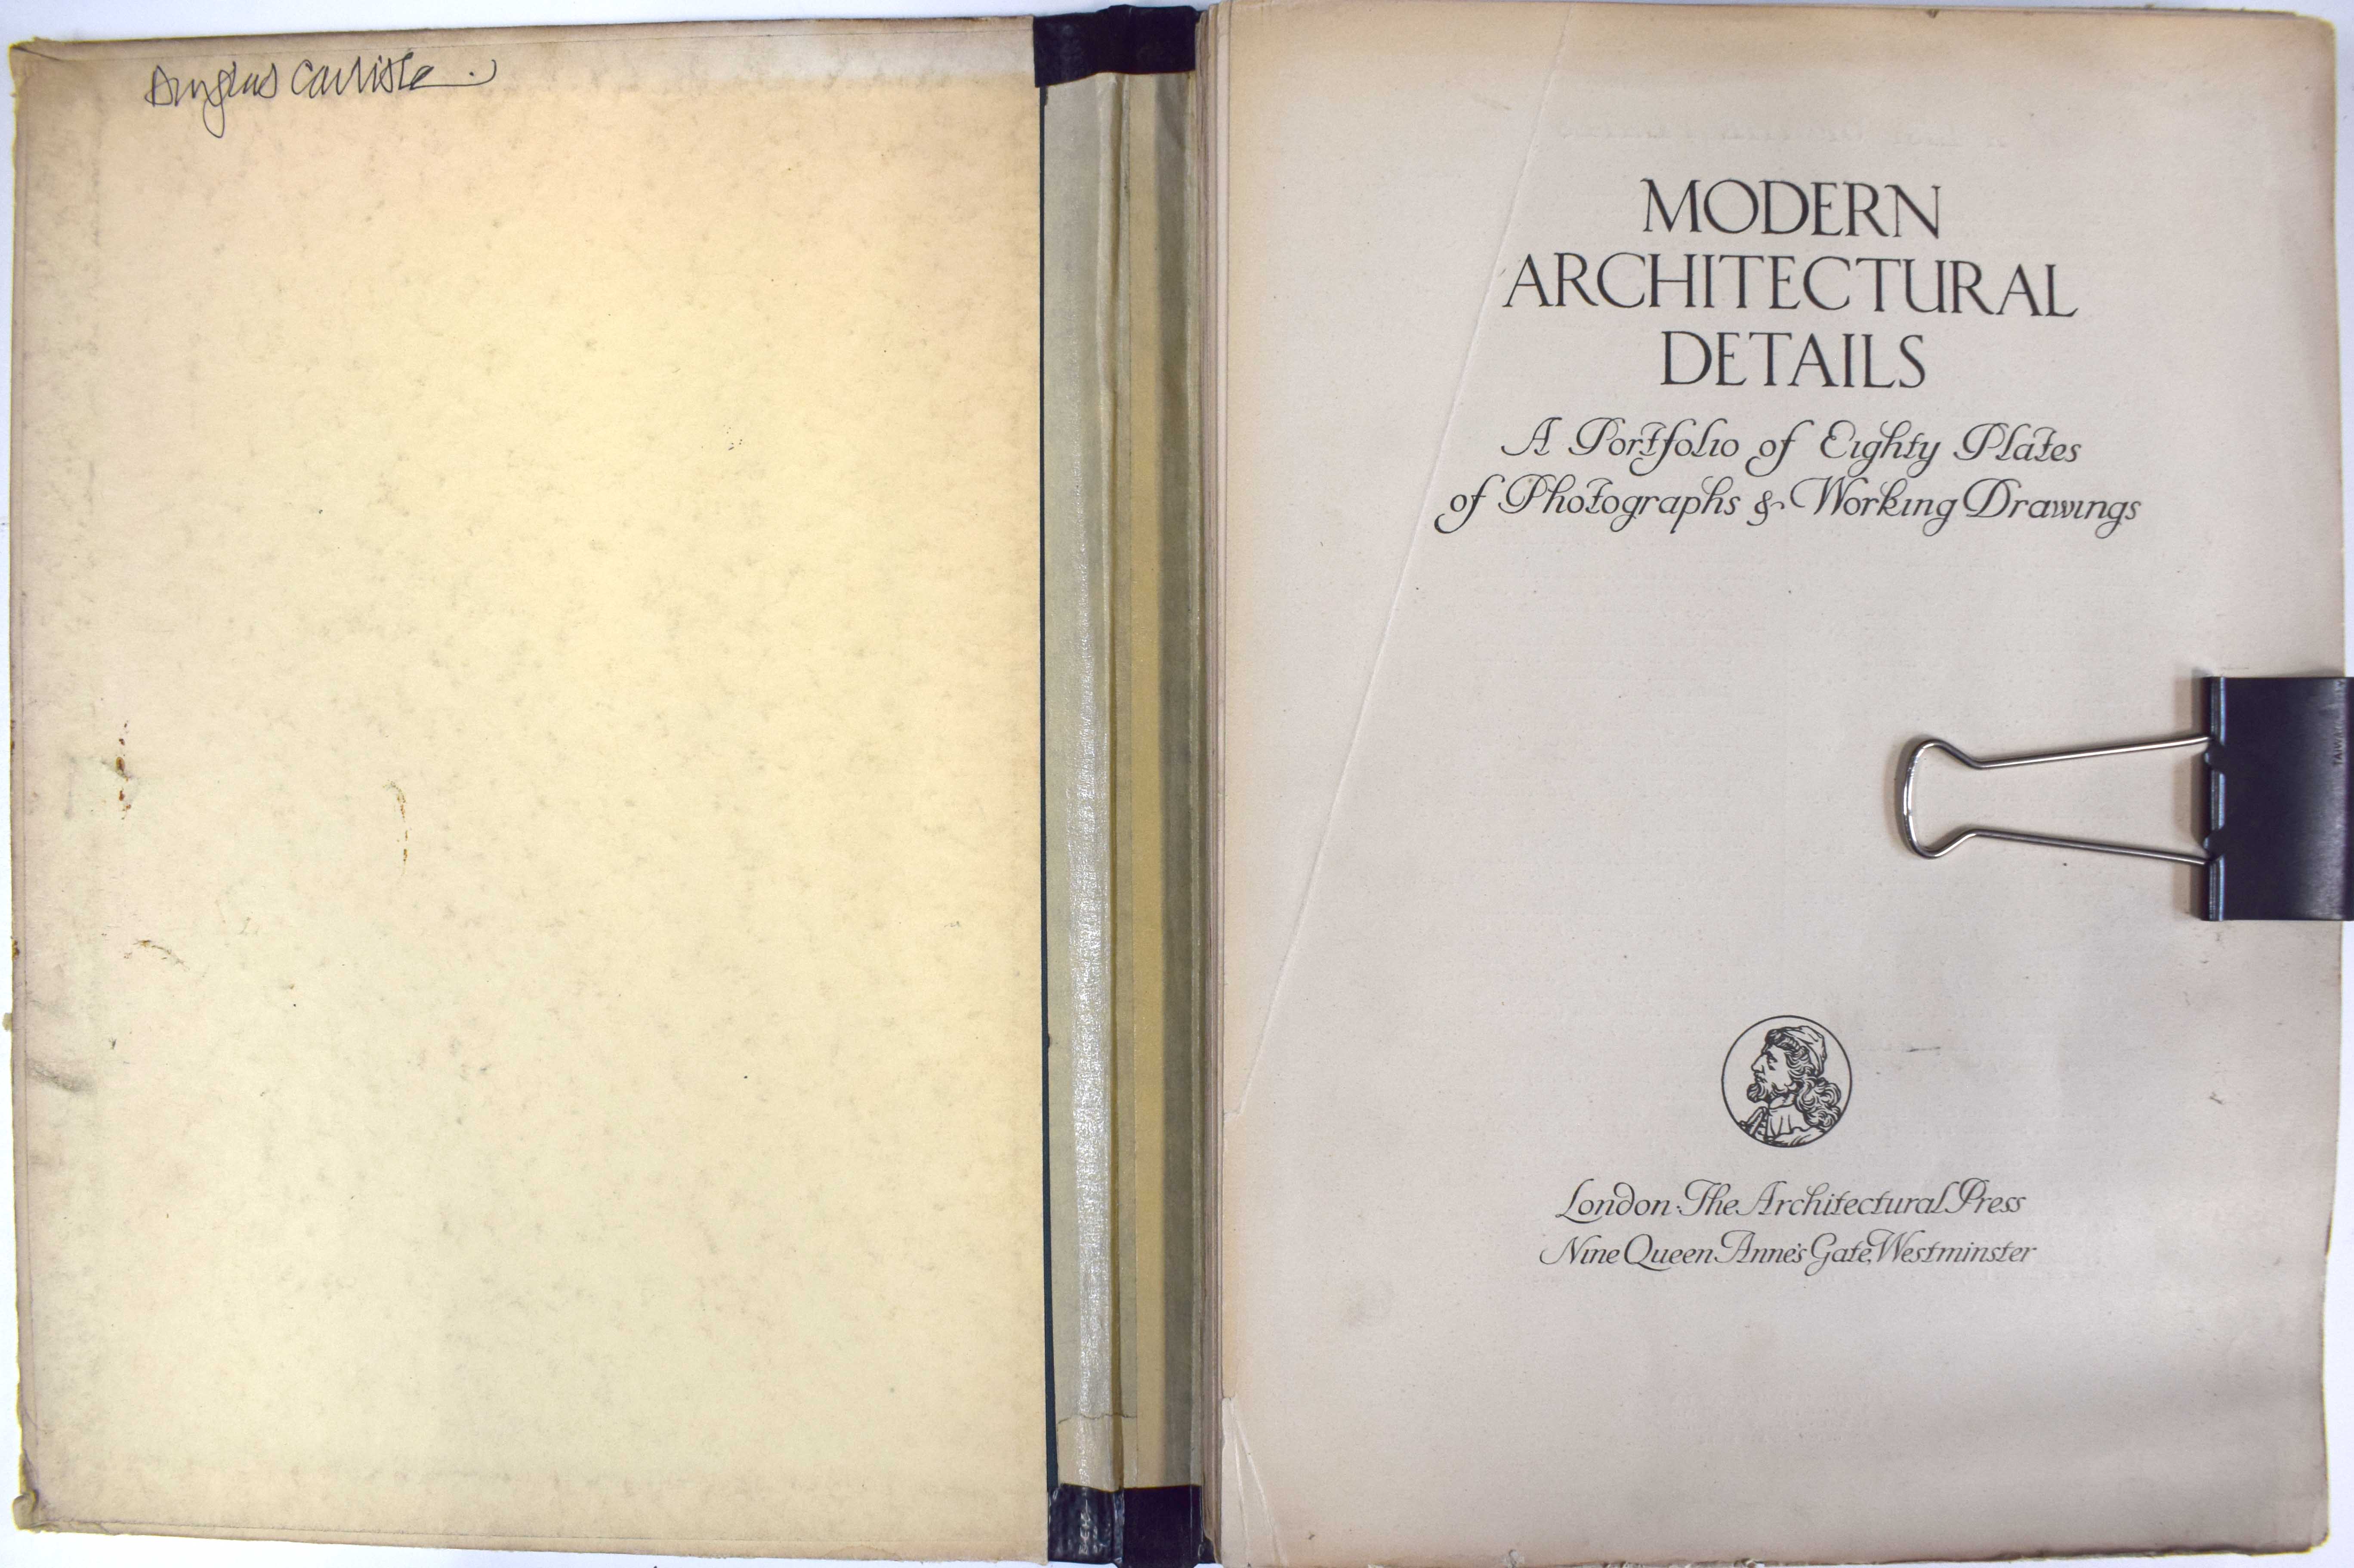 Modern Architectural Details. A Portfolio of Eighty Plates of Photographs & Working Drawings.